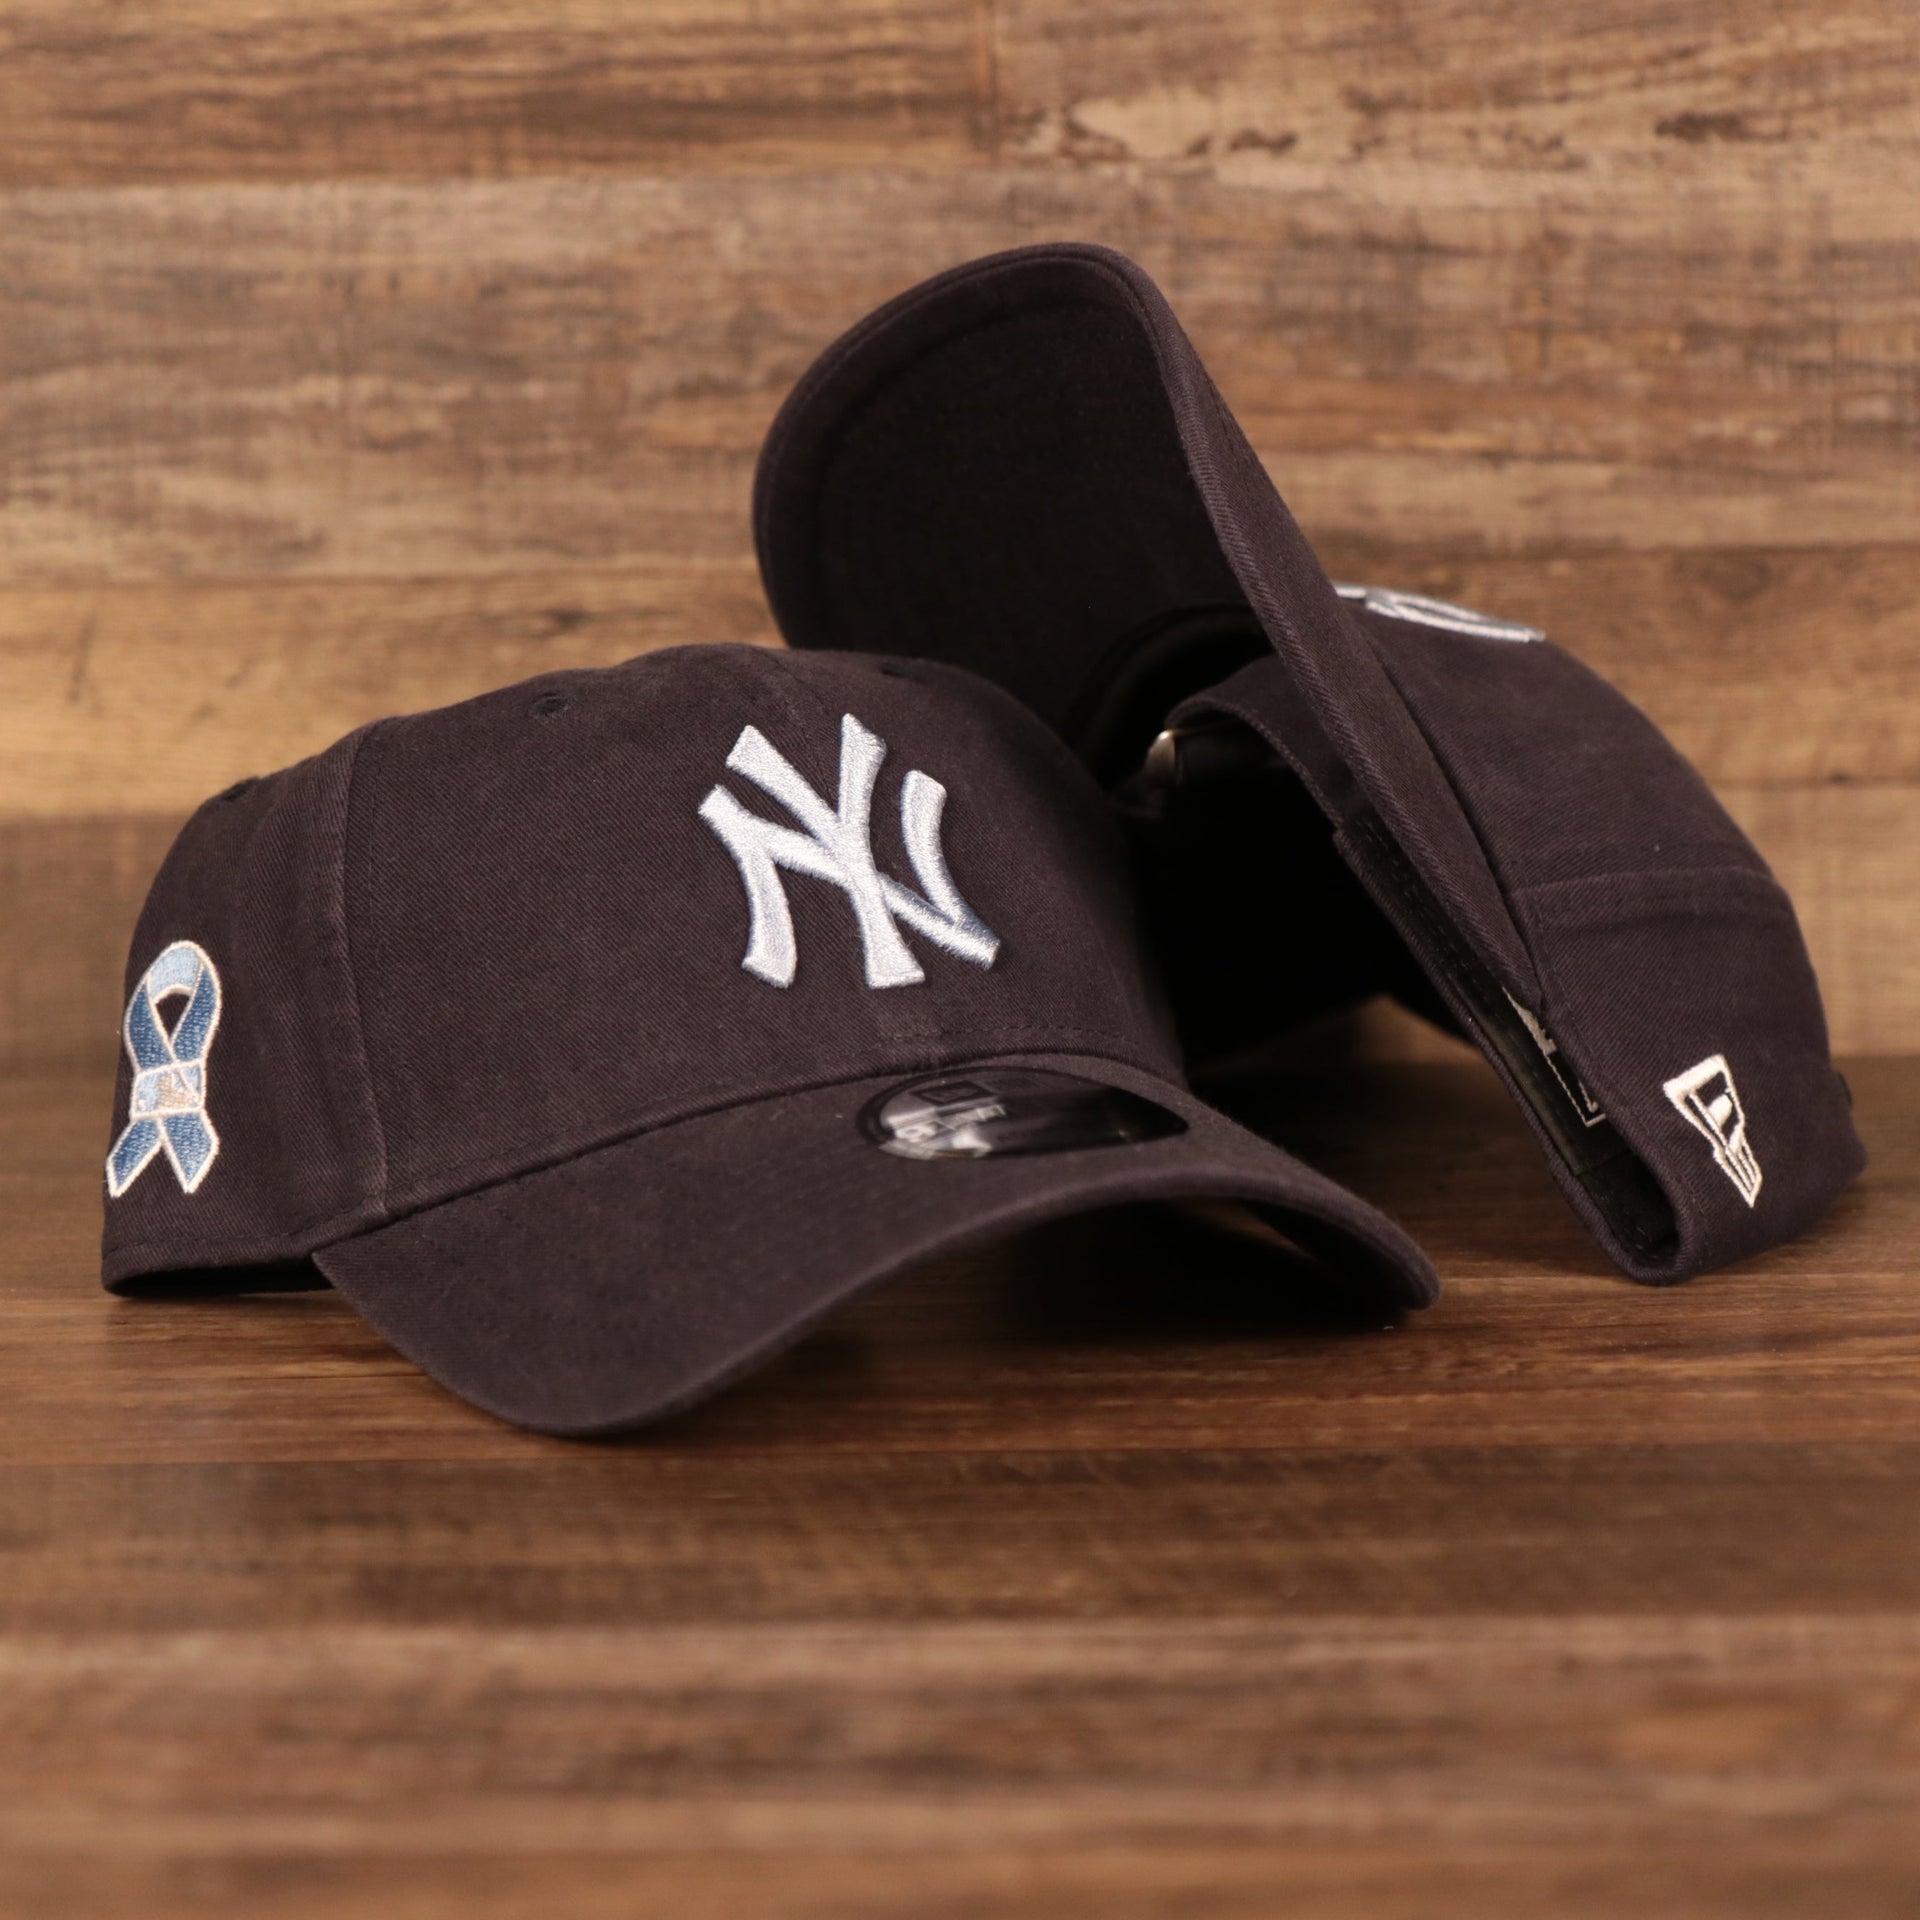 The Yankees navy blue  New Era fathers day 2021 920 dad hat has the light blue logo on the front side